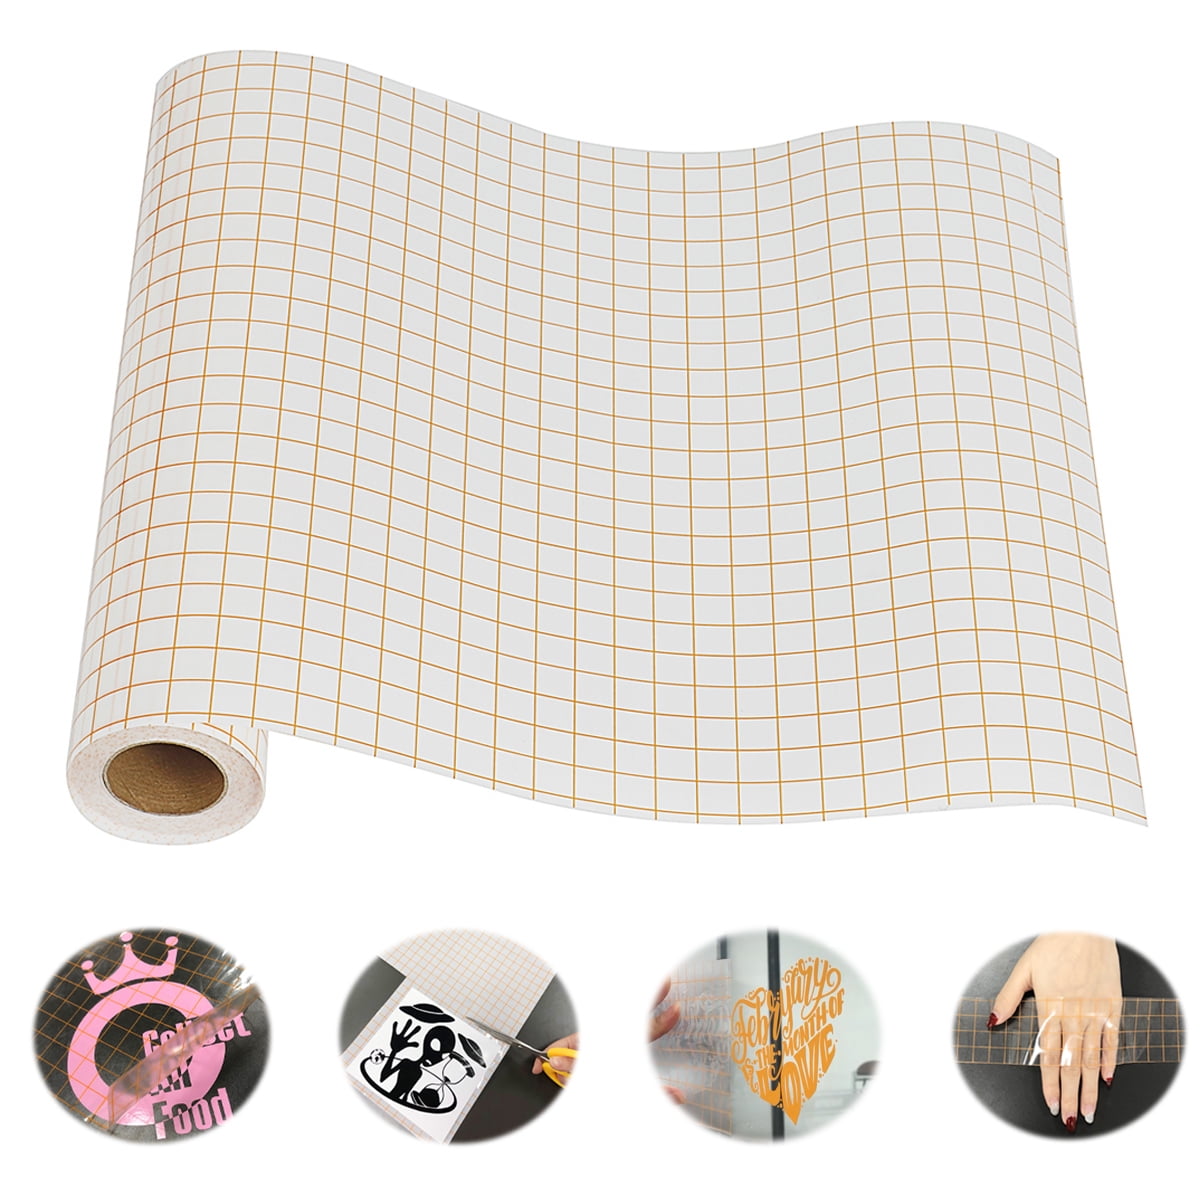 Vinyl Transfer Tape Application 12" X 30 FT Transfer Paper Clear Roll with Grid